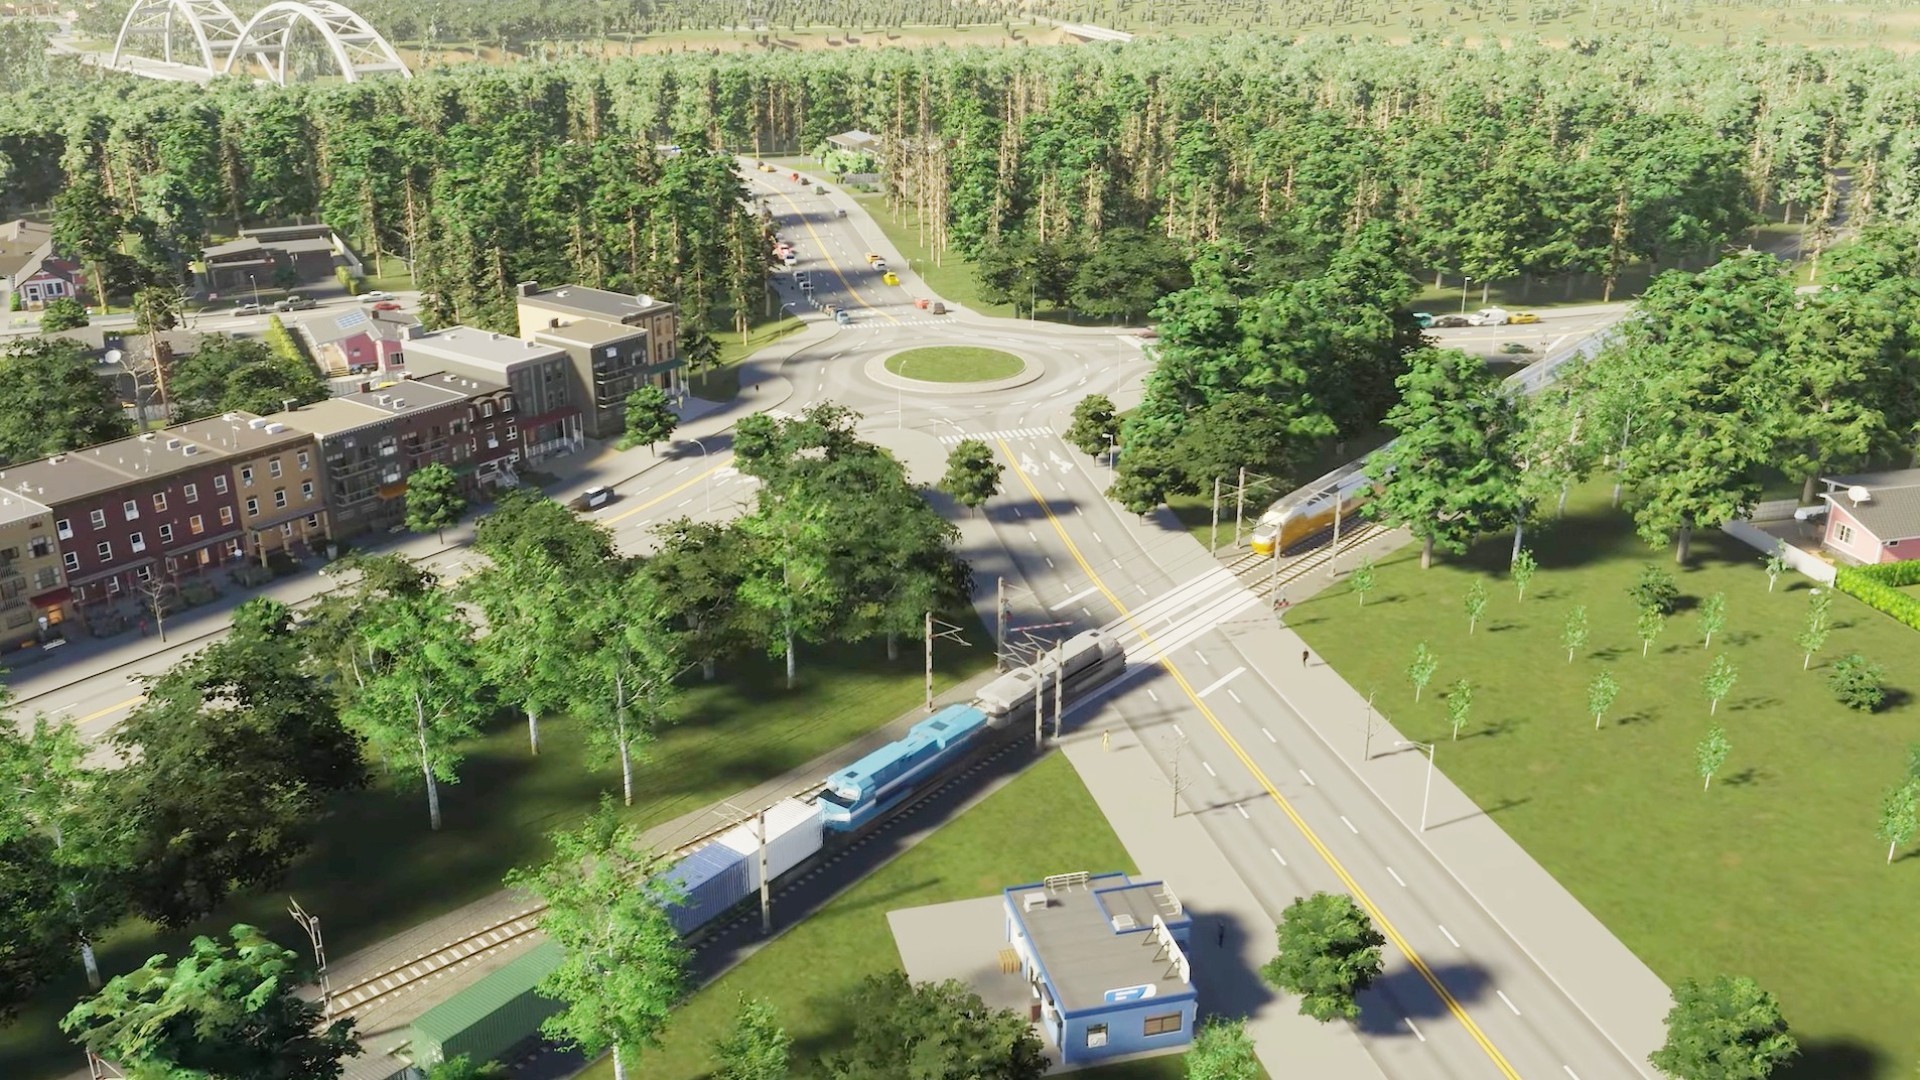 The Cities Skylines 2 download size is even bigger than we thought